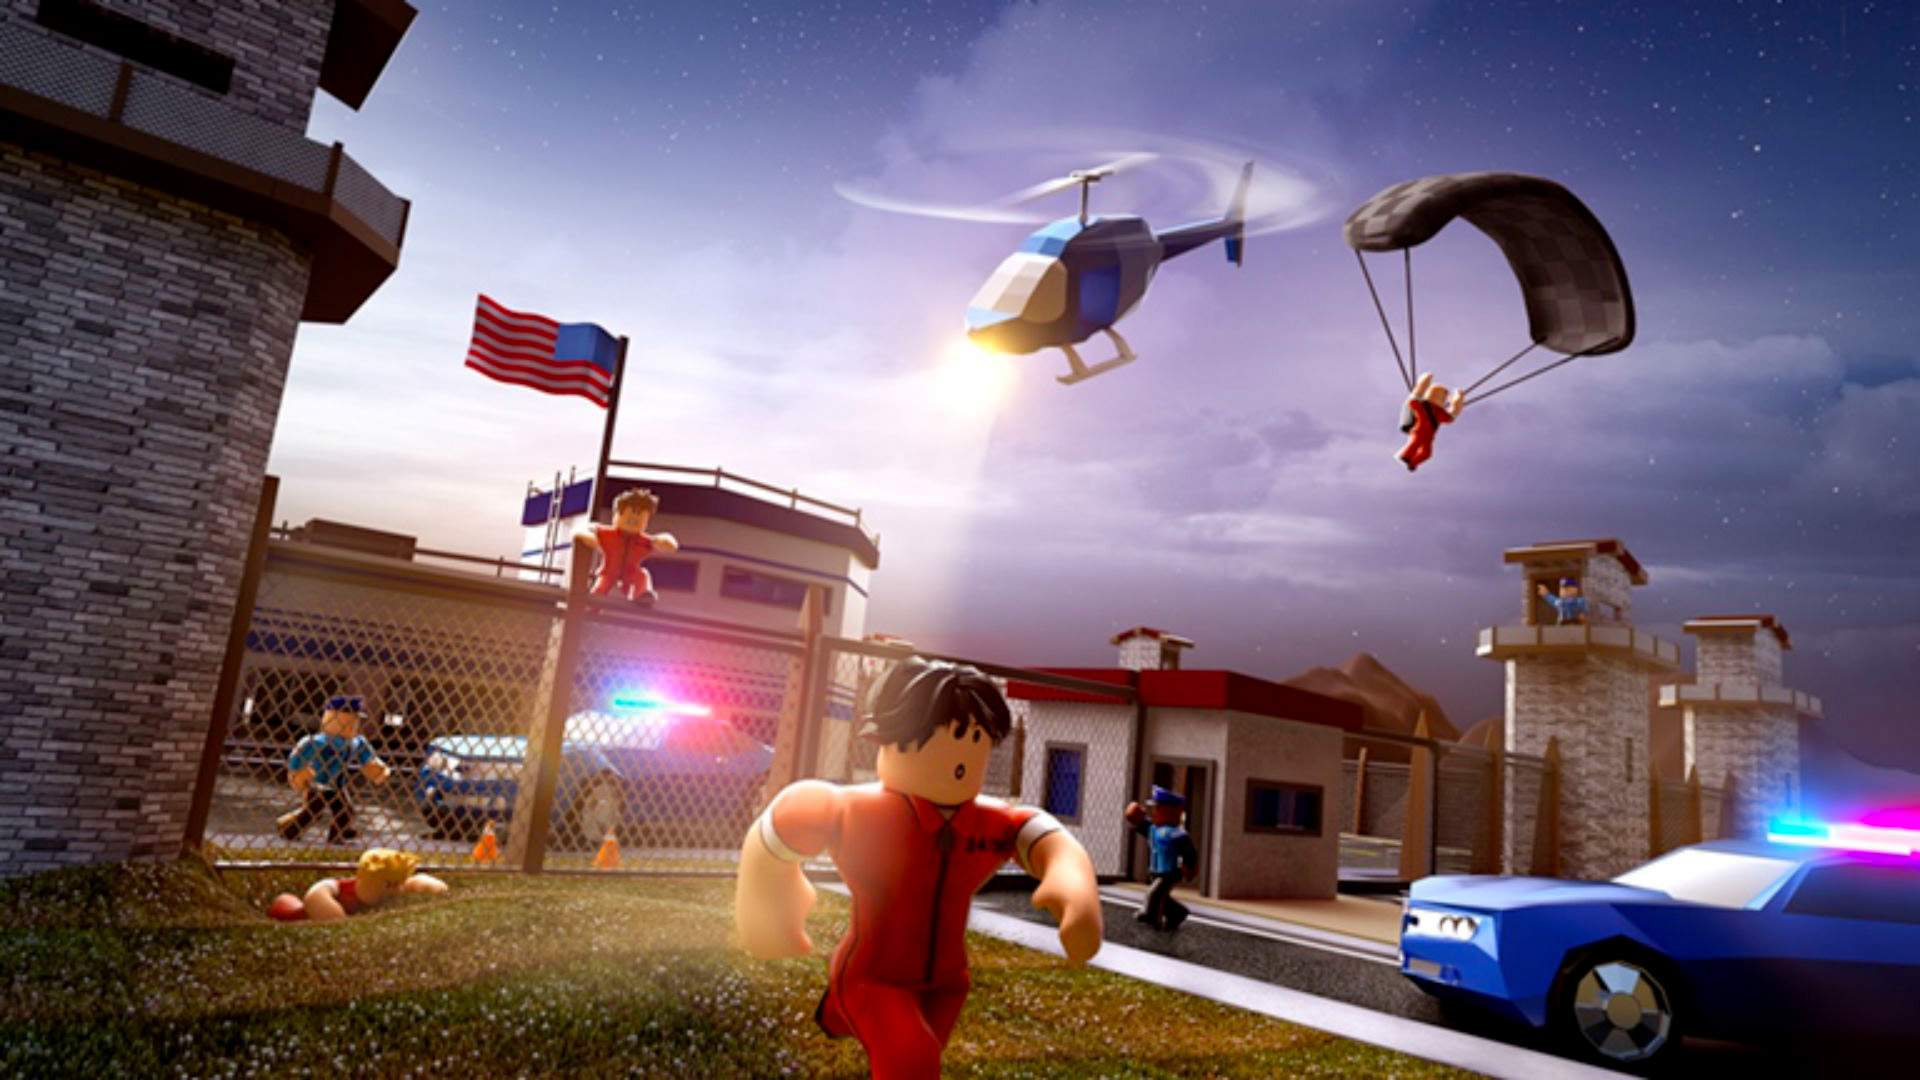 5 best Roblox games that are similar to The Sims